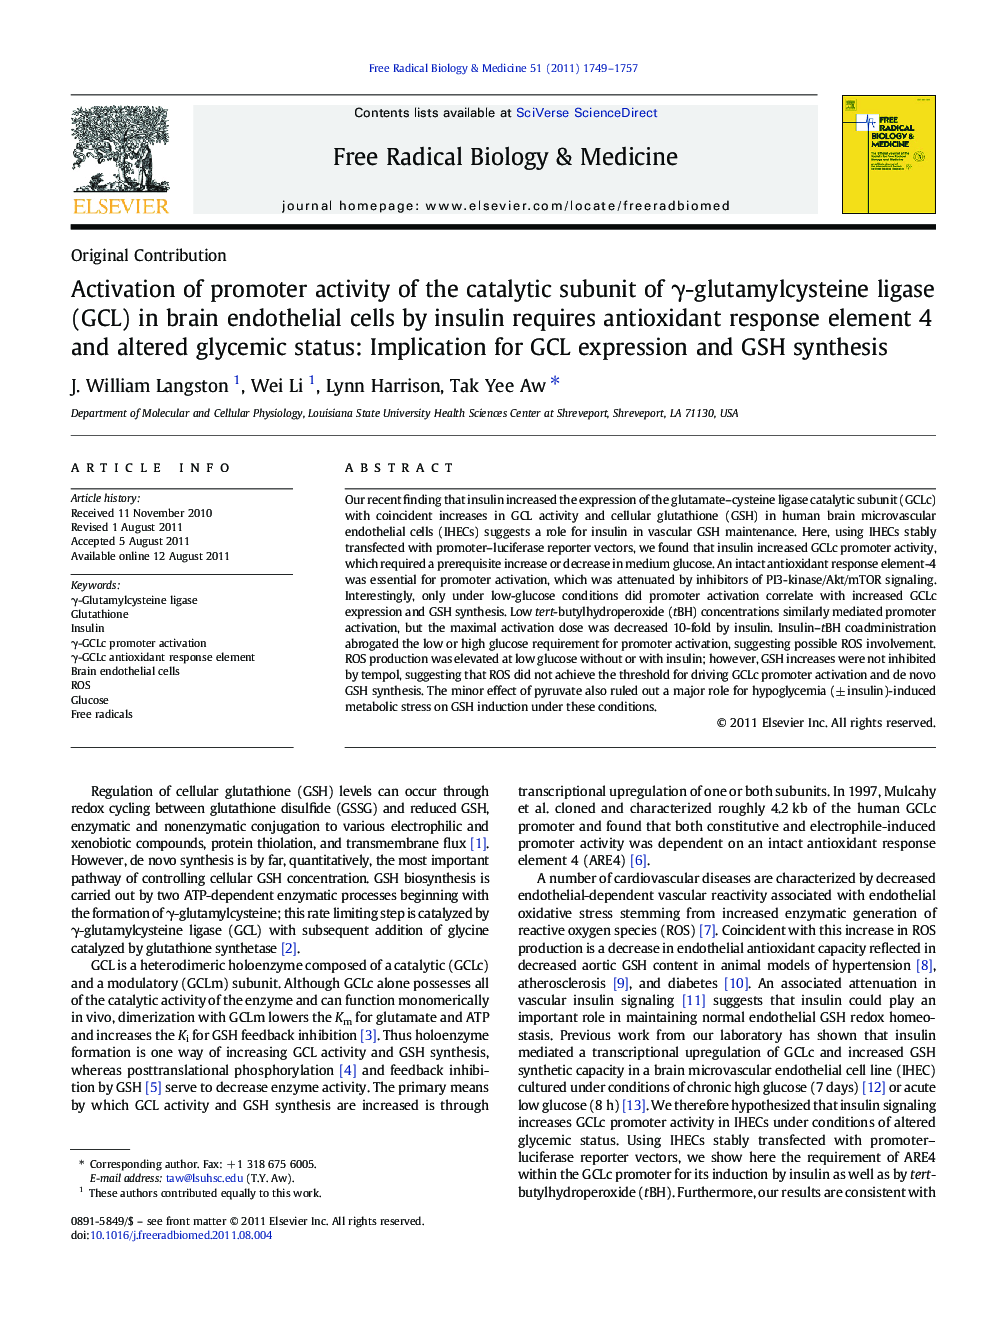 Activation of promoter activity of the catalytic subunit of Î³-glutamylcysteine ligase (GCL) in brain endothelial cells by insulin requires antioxidant response element 4 and altered glycemic status: Implication for GCL expression and GSH synthesis